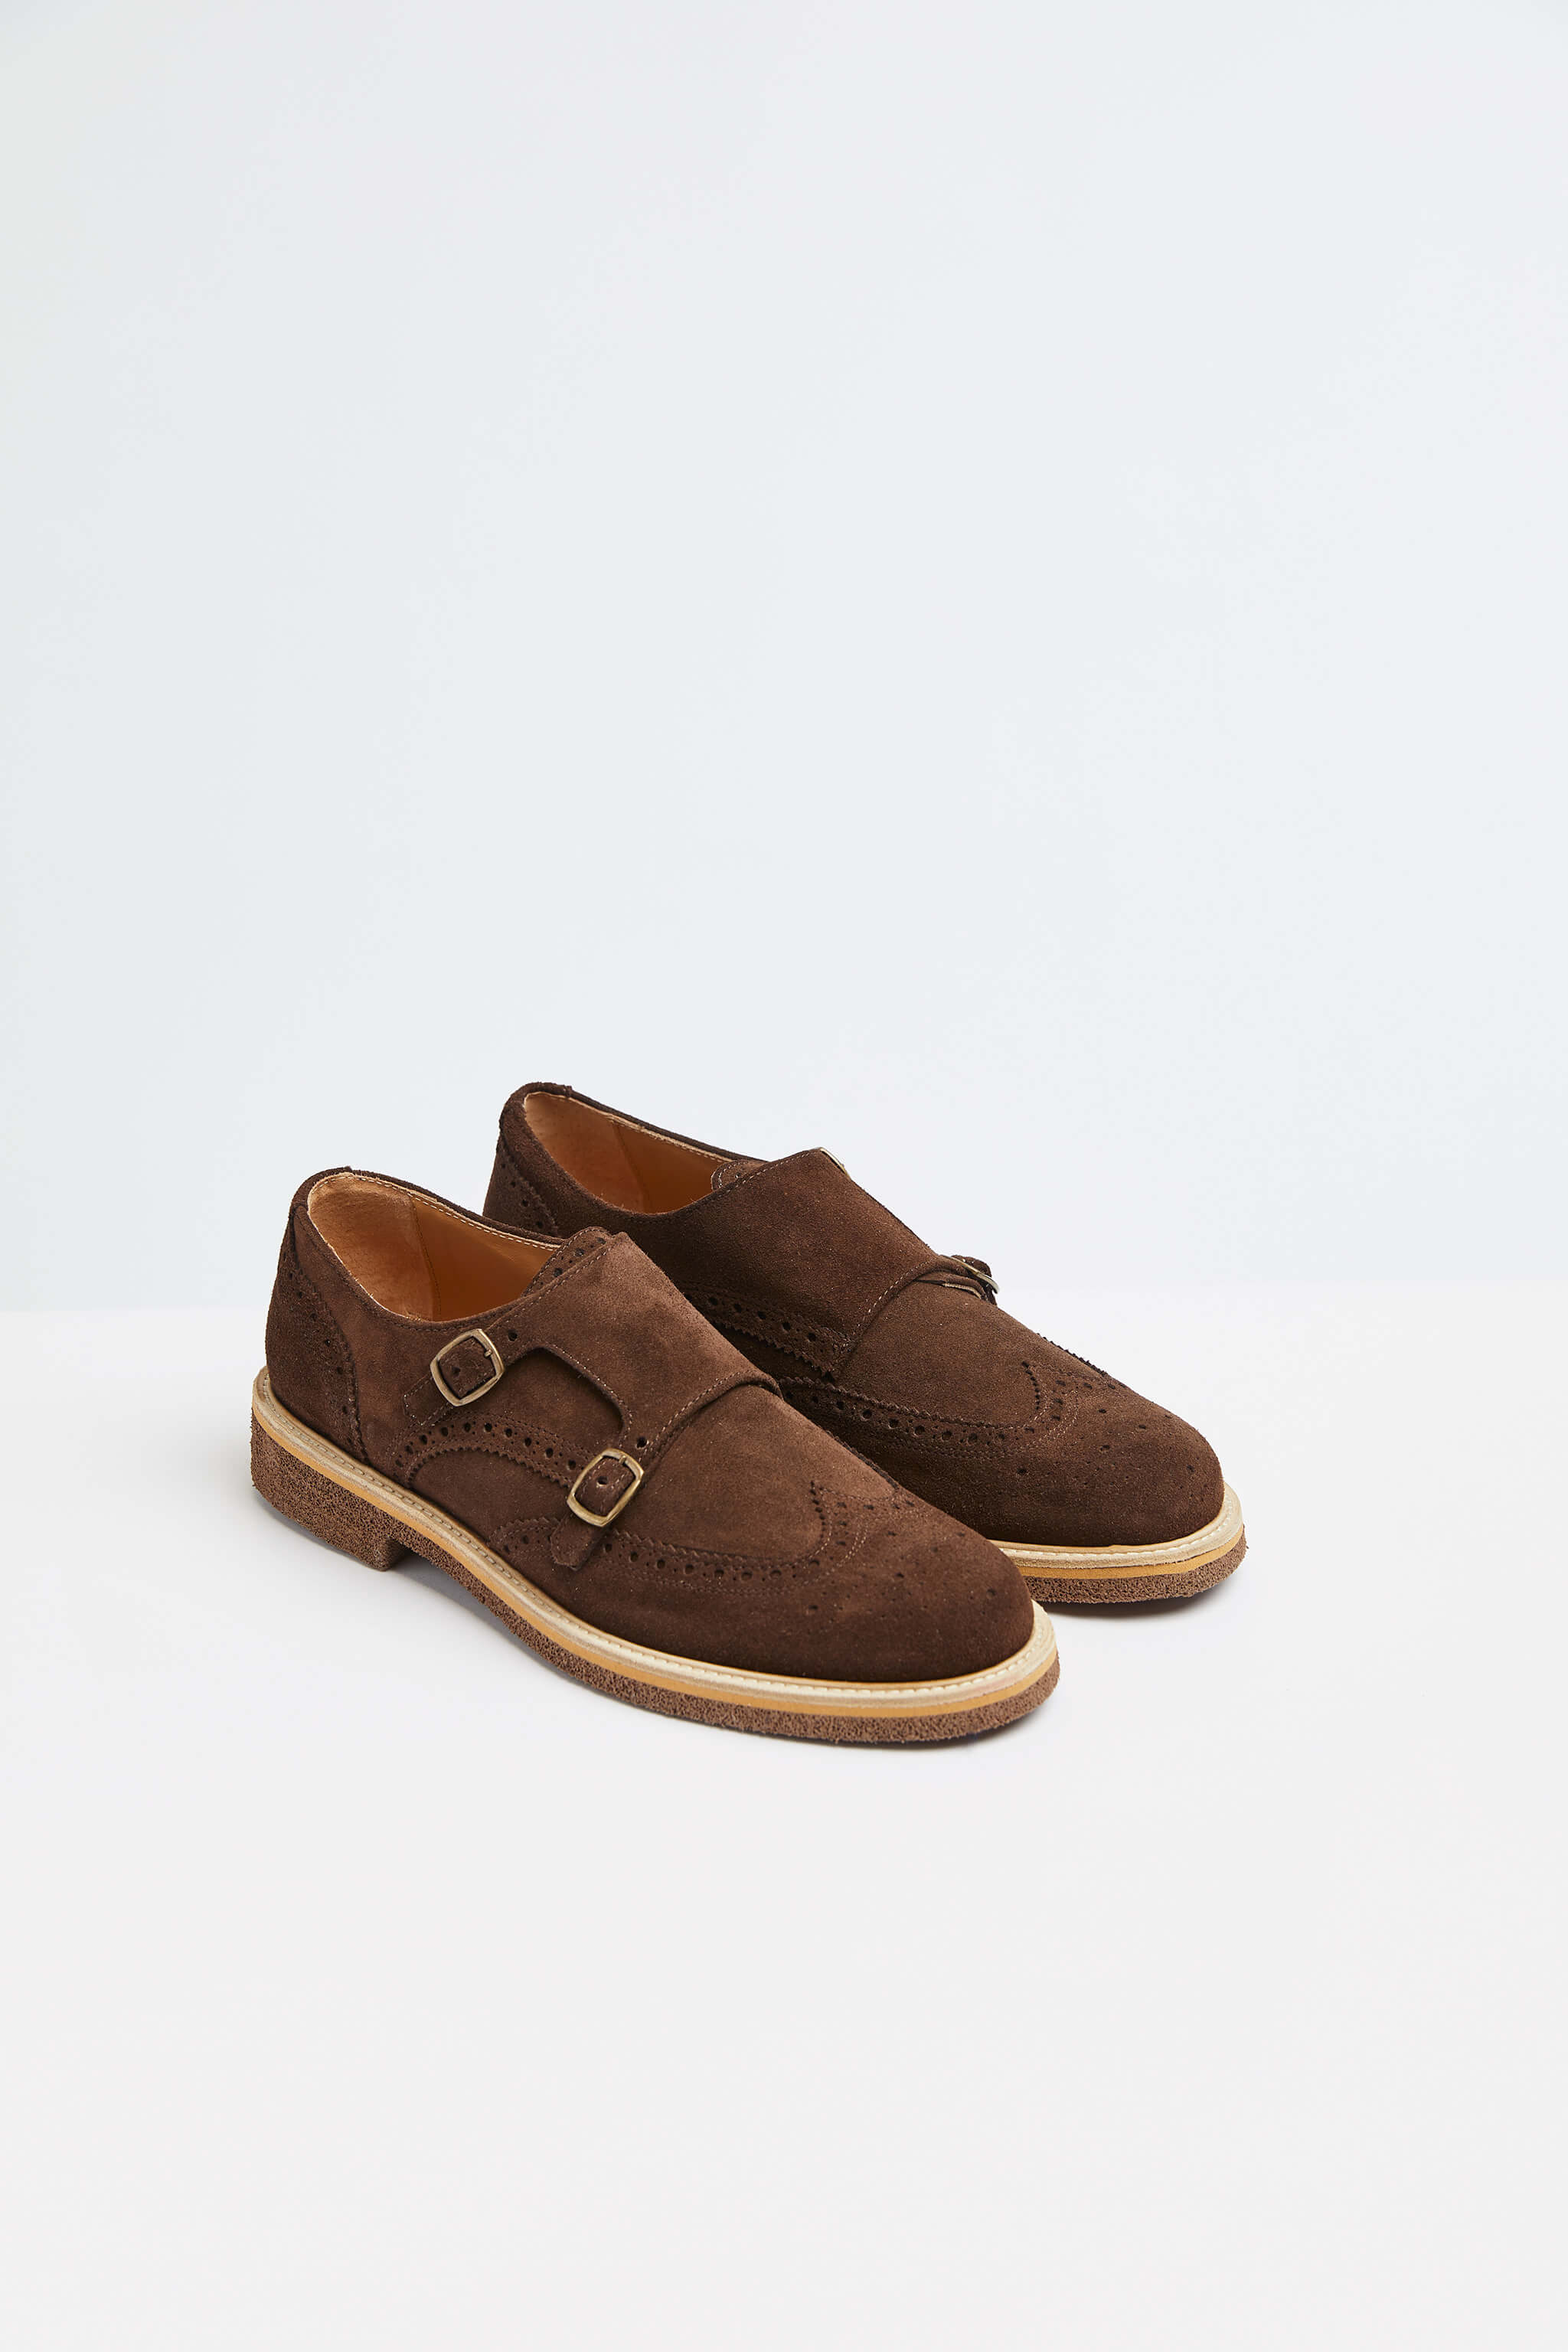 Leather Monk strap shoe in brown